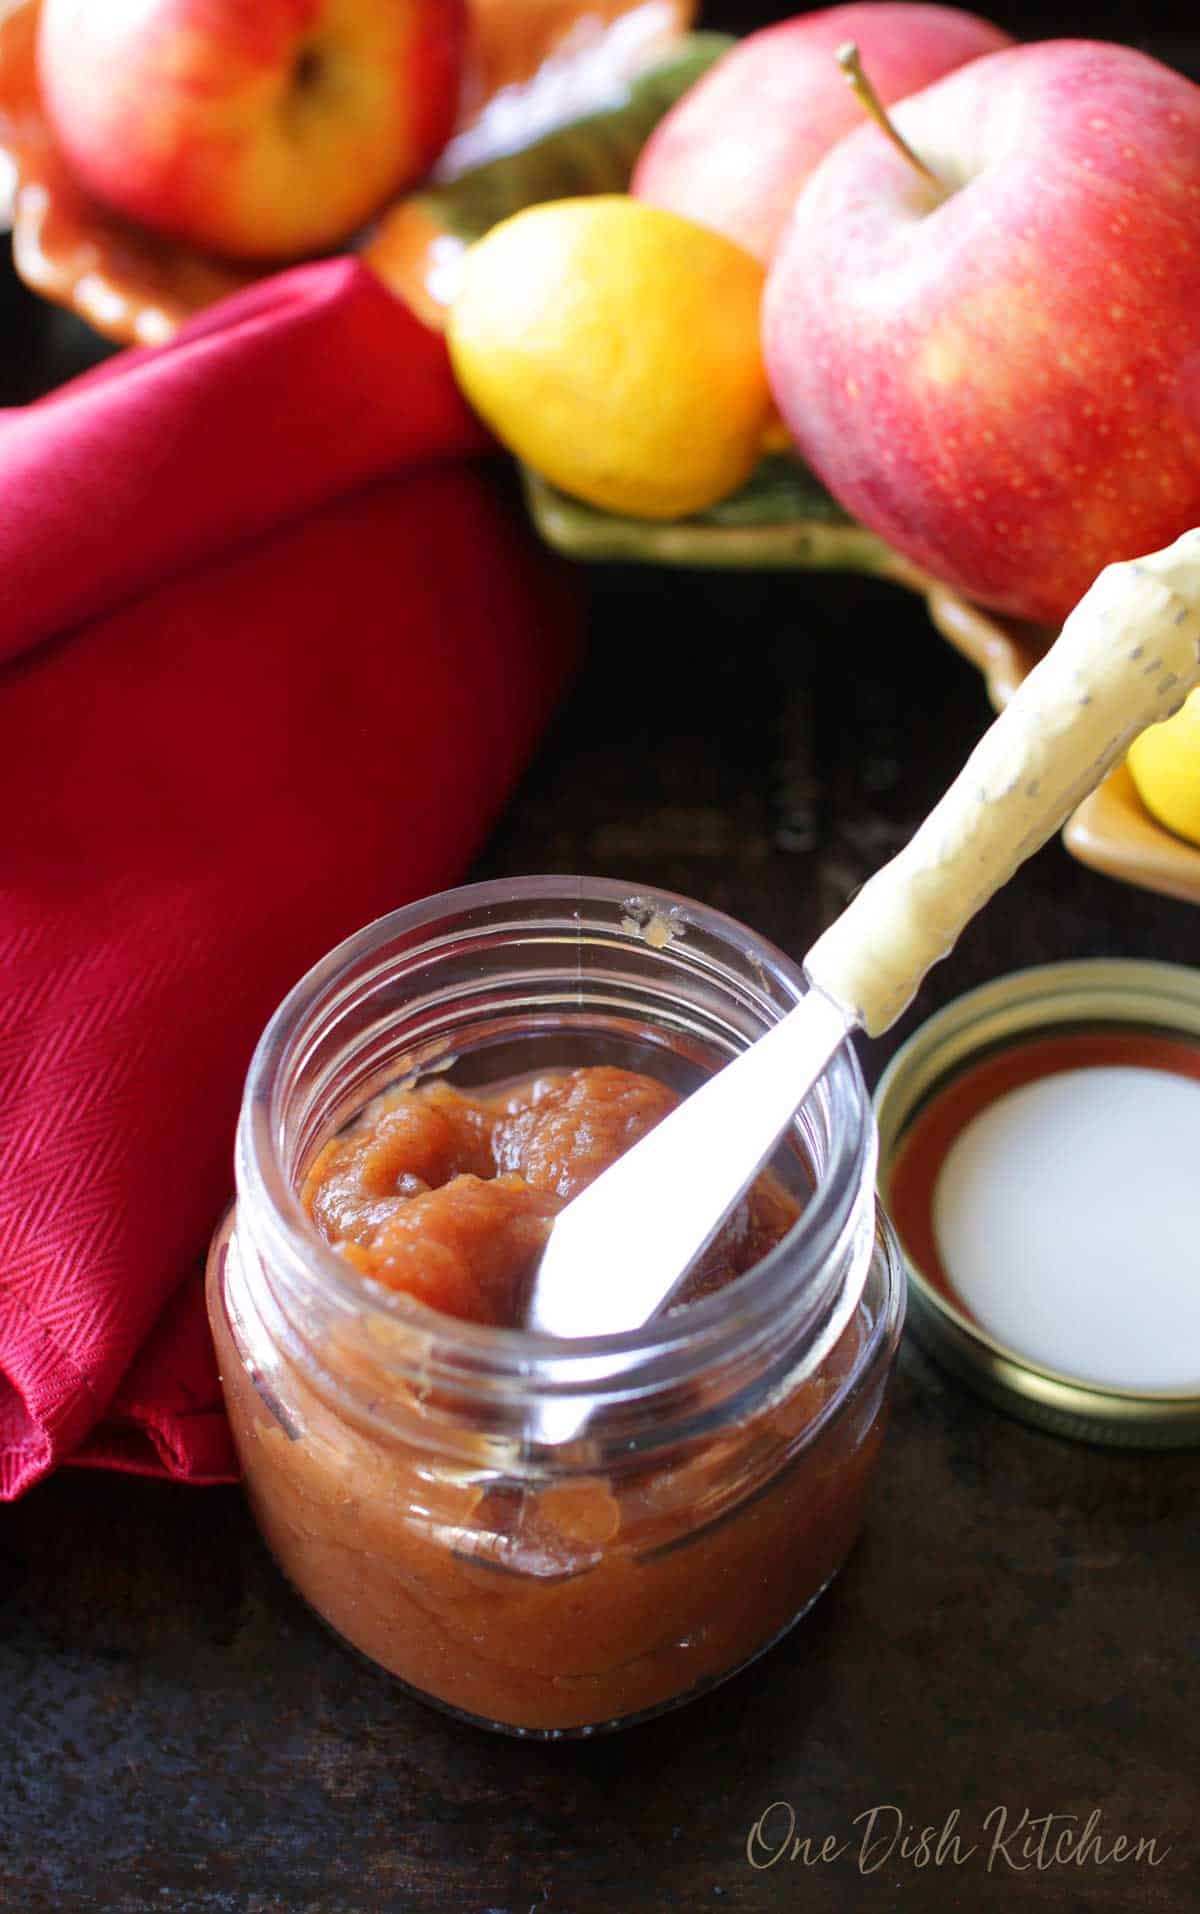 Apple butter in a small jar with a knife on a dark surface with a red cloth napkin and a bowl of apples and lemons.